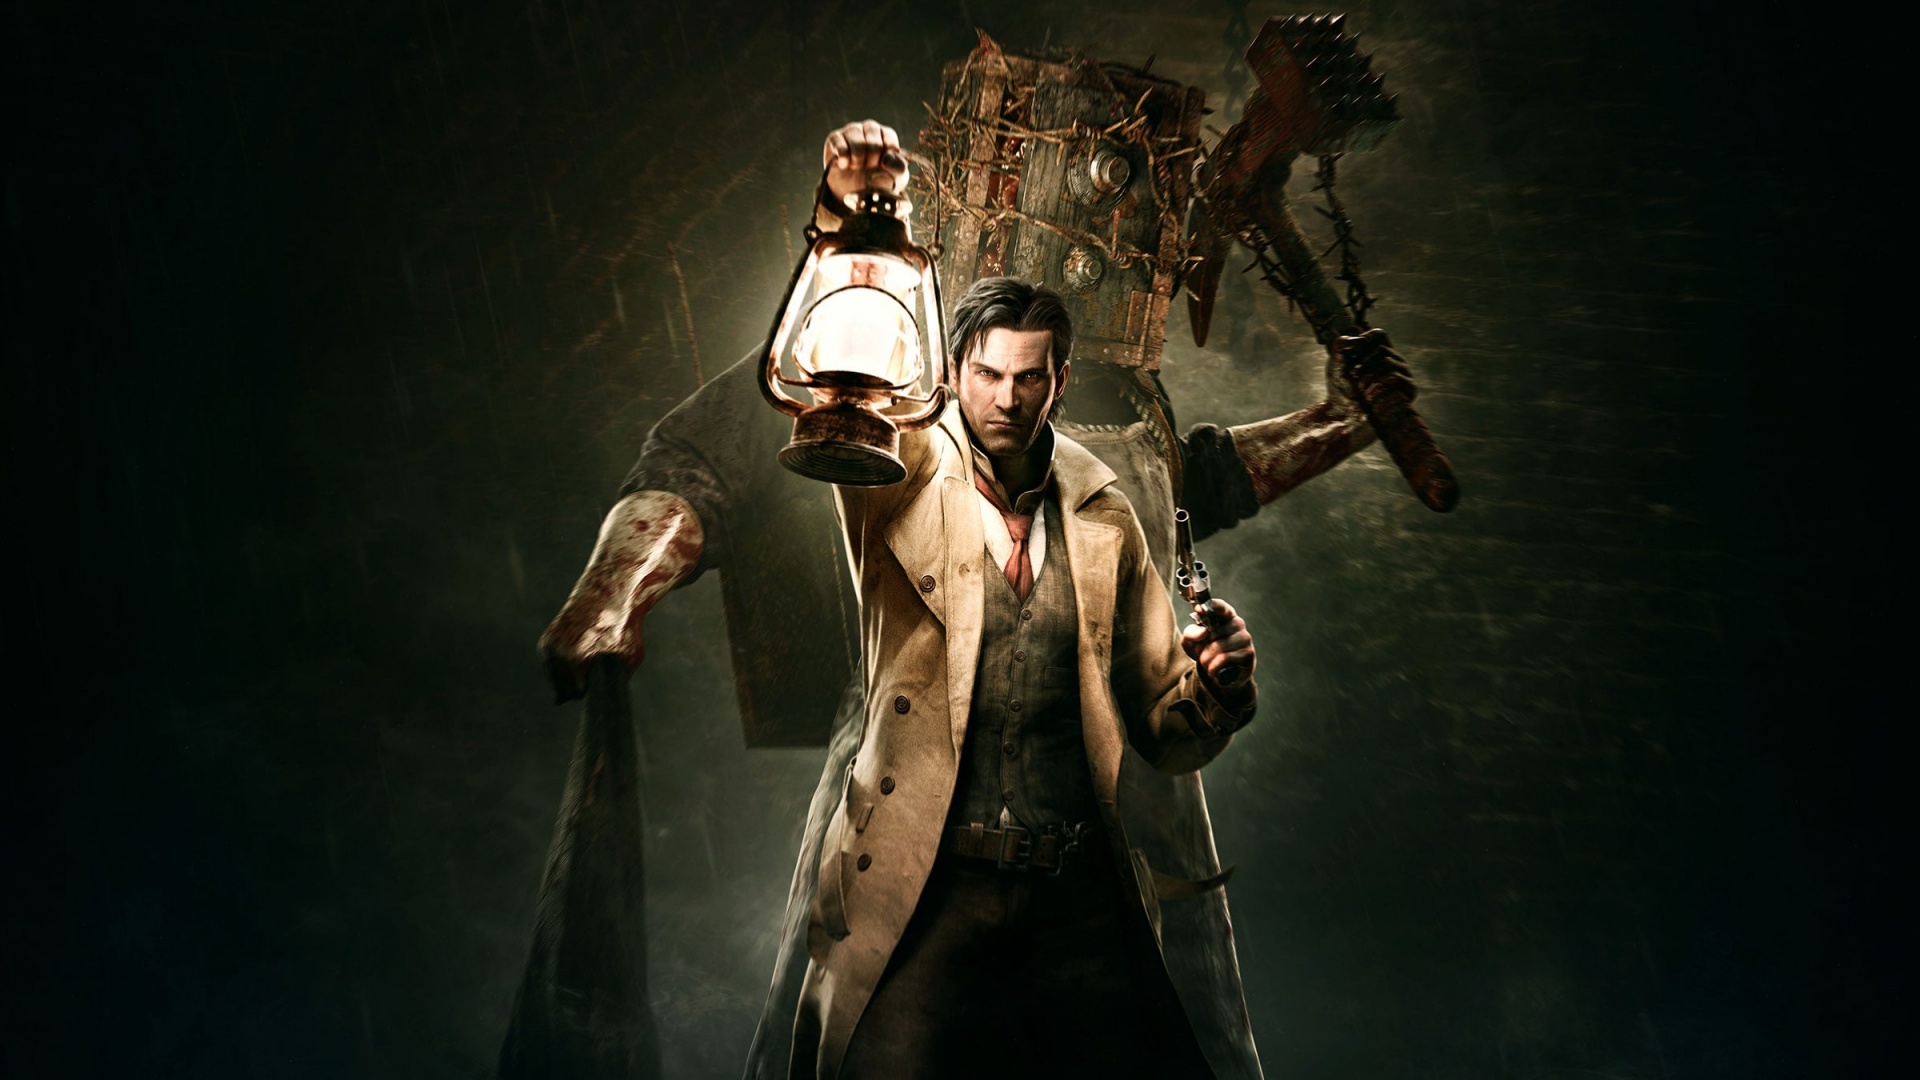 The evil within шкафчики